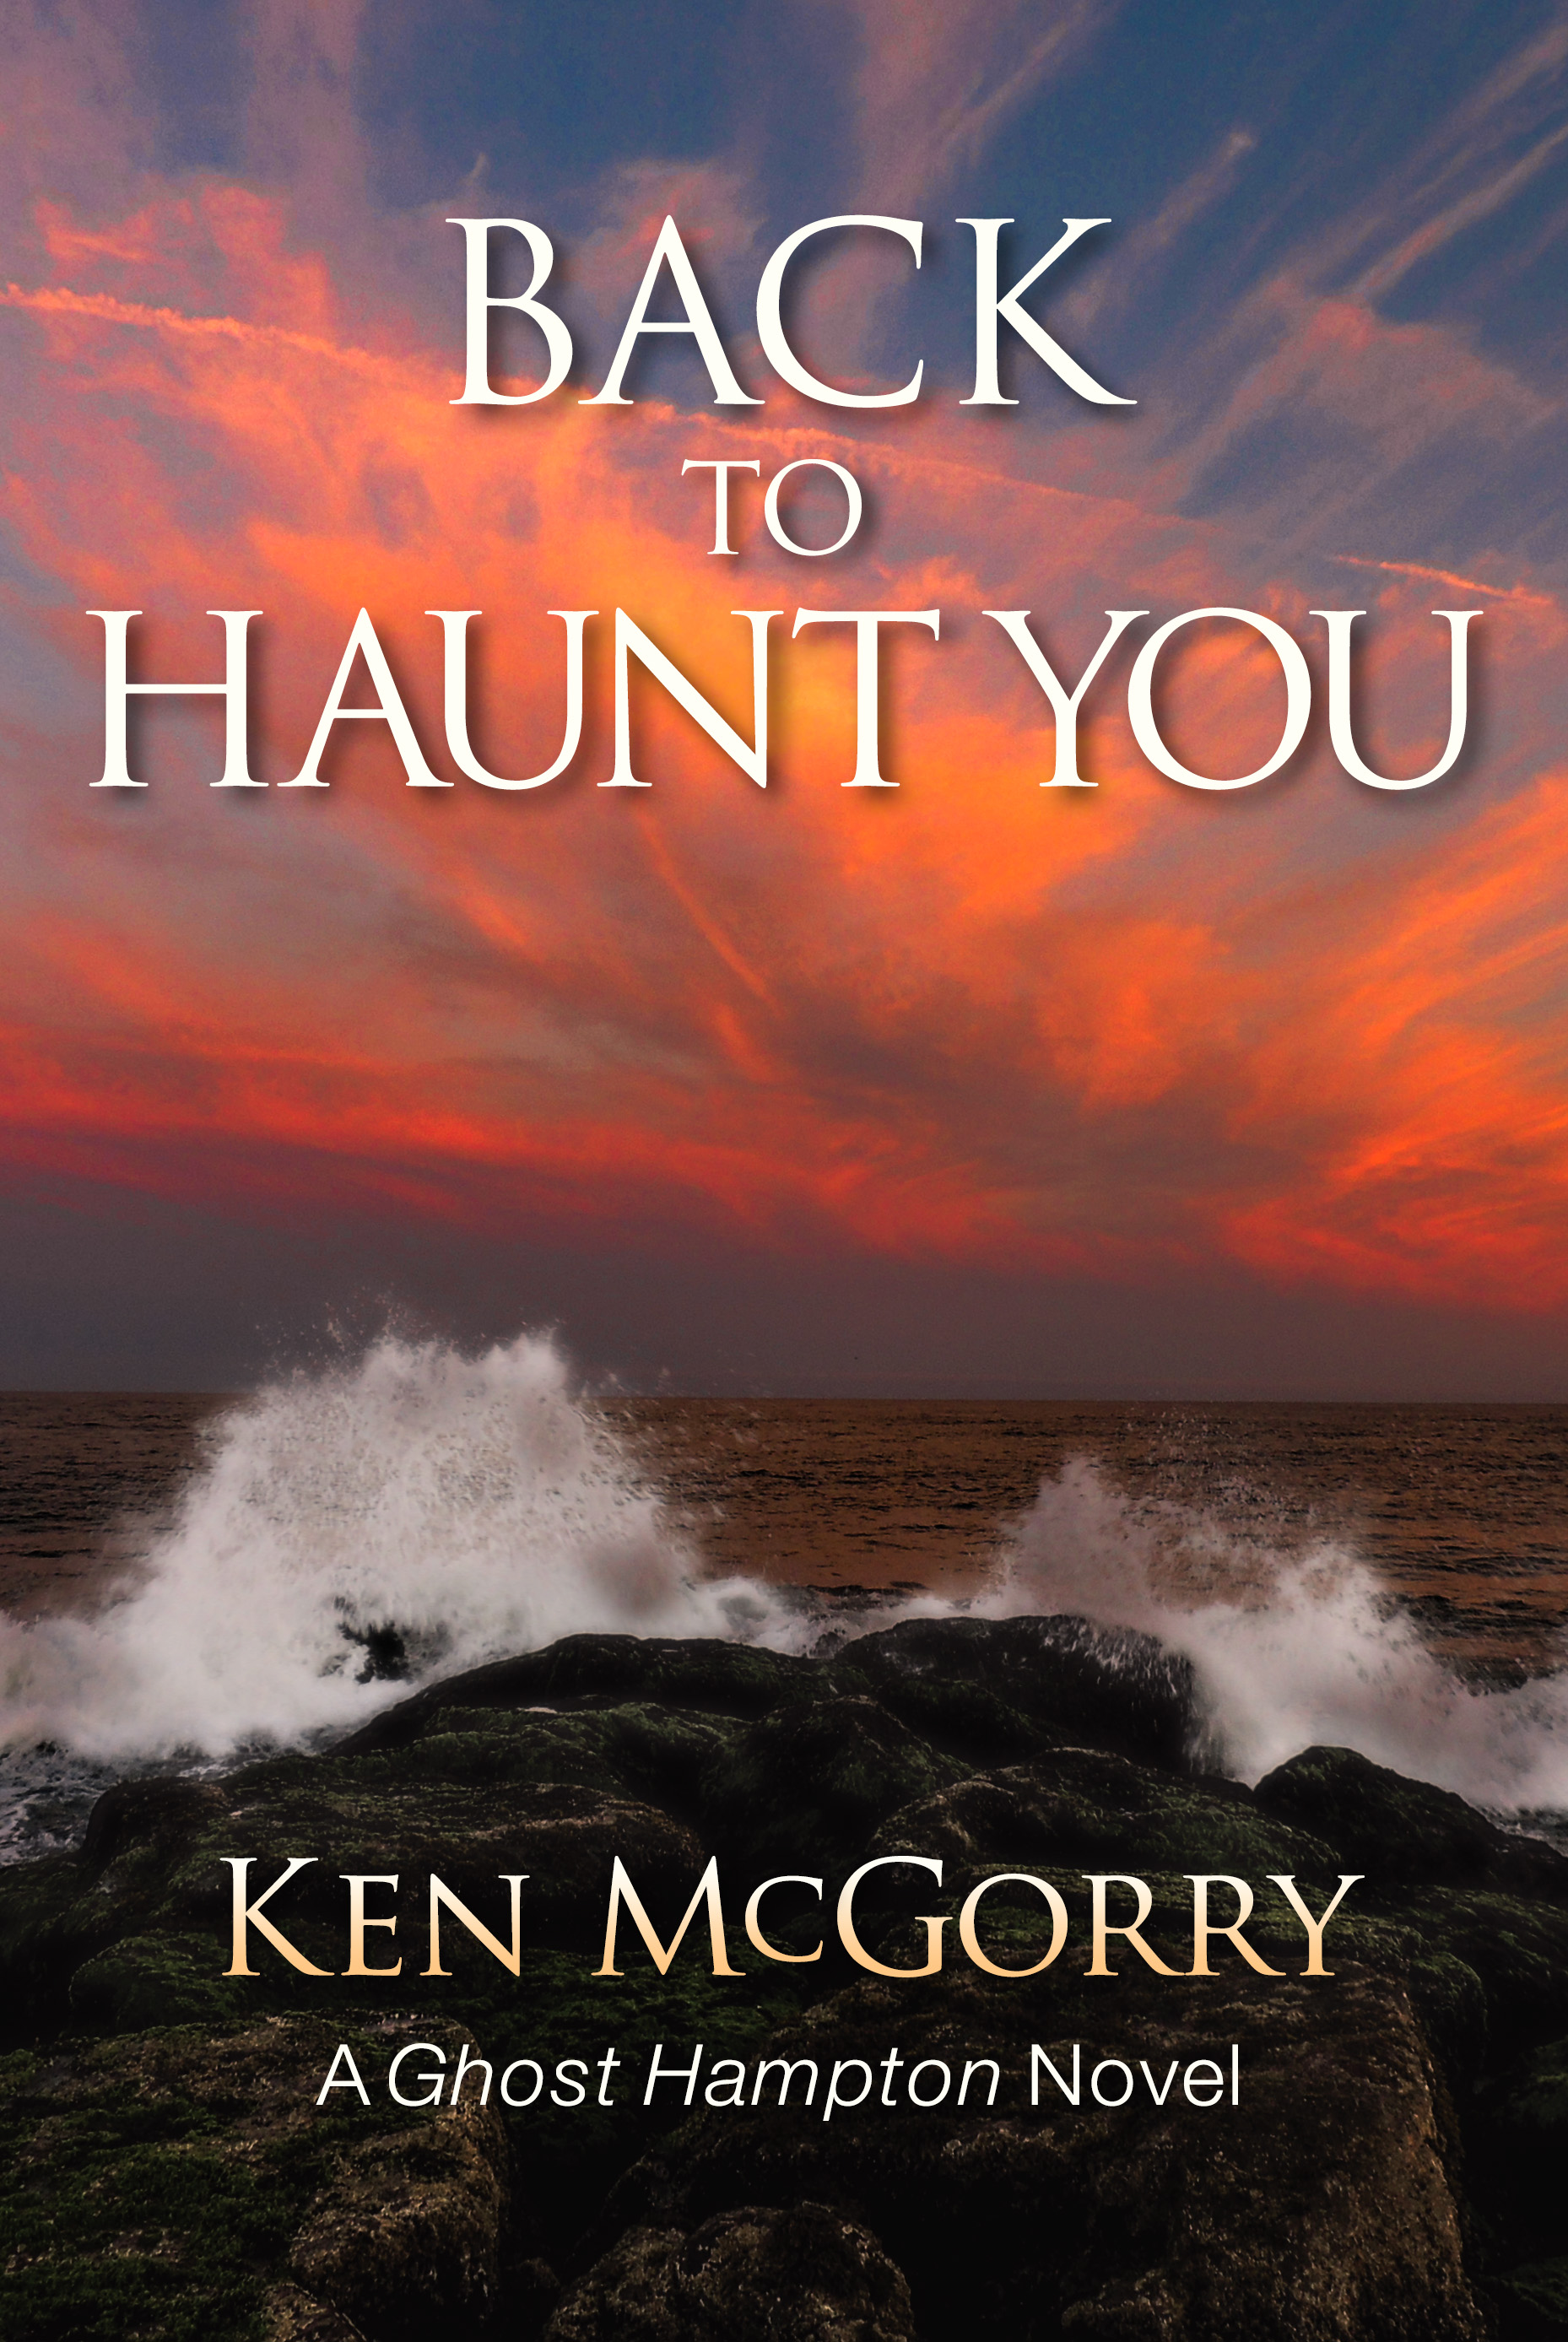 Front Cover of Ken McGorry's latest novel, Back to Haunt You